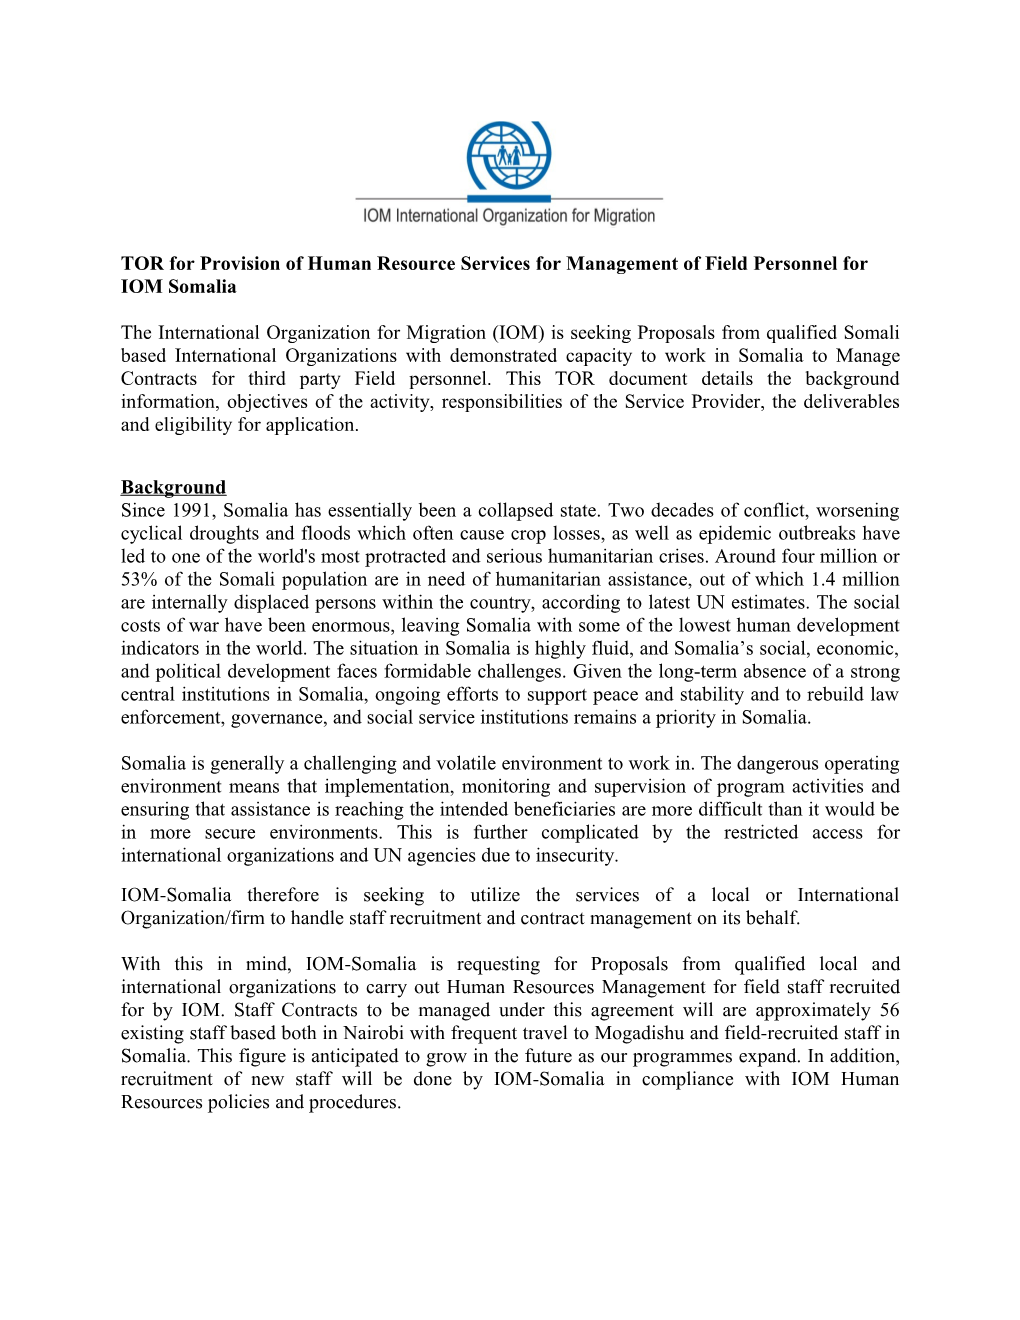 TOR for Provision of Human Resource Services for Management of Field Personnel for IOM Somalia